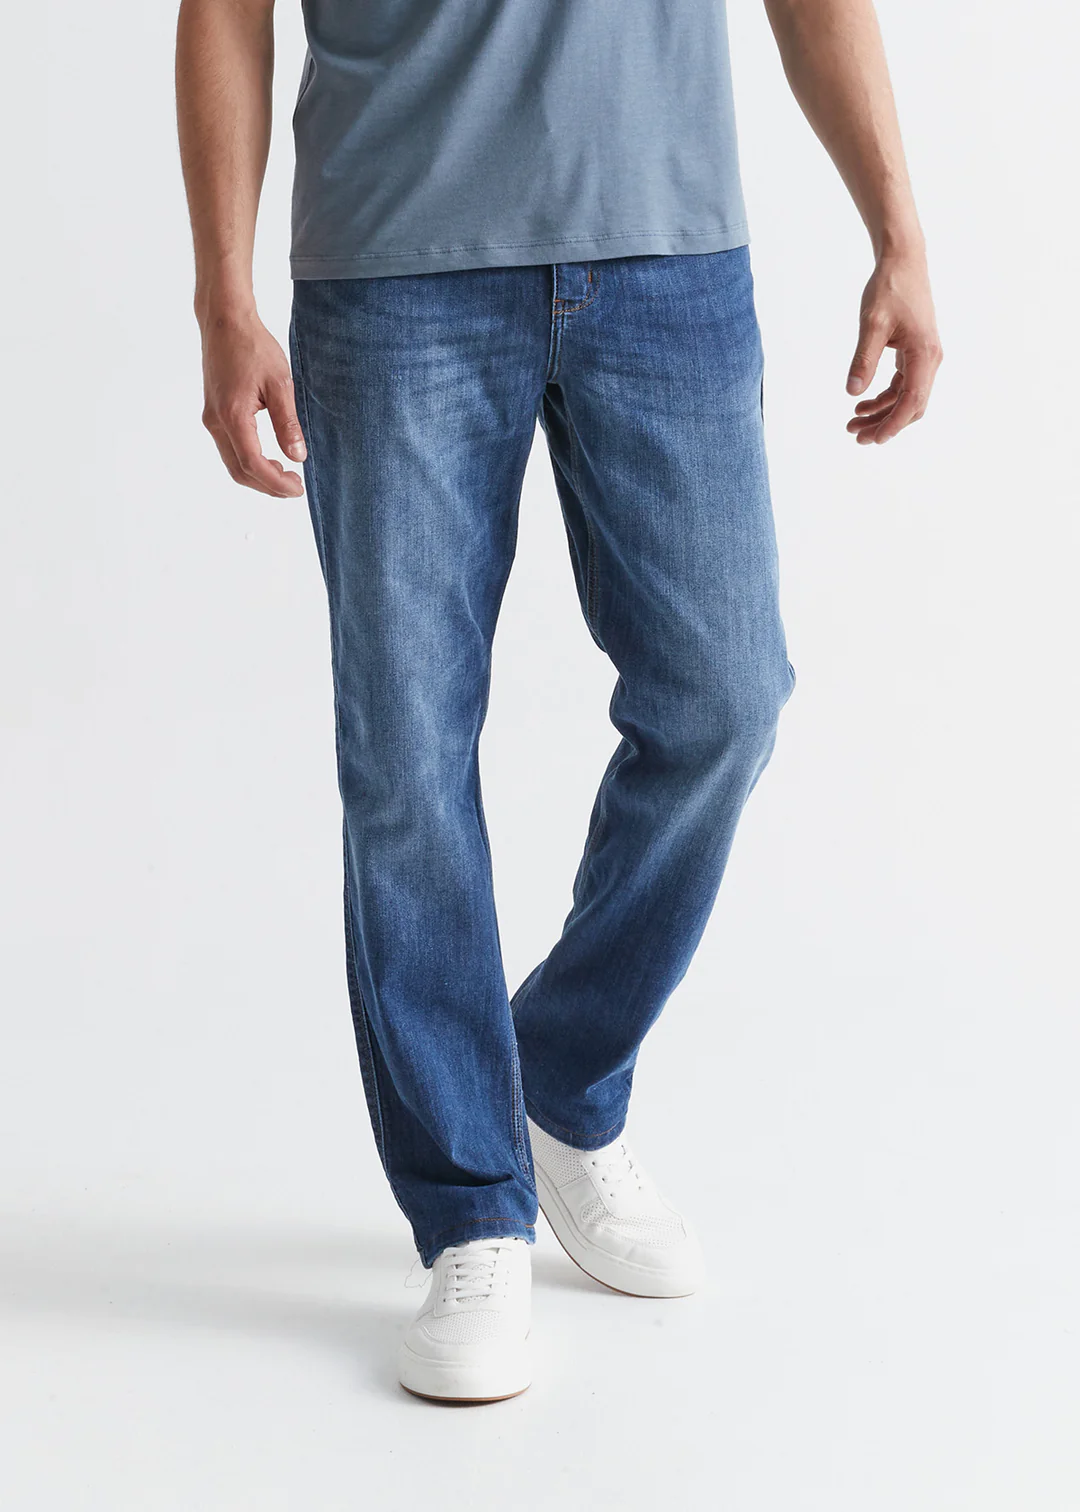 DUER Athletic Fit Jeans